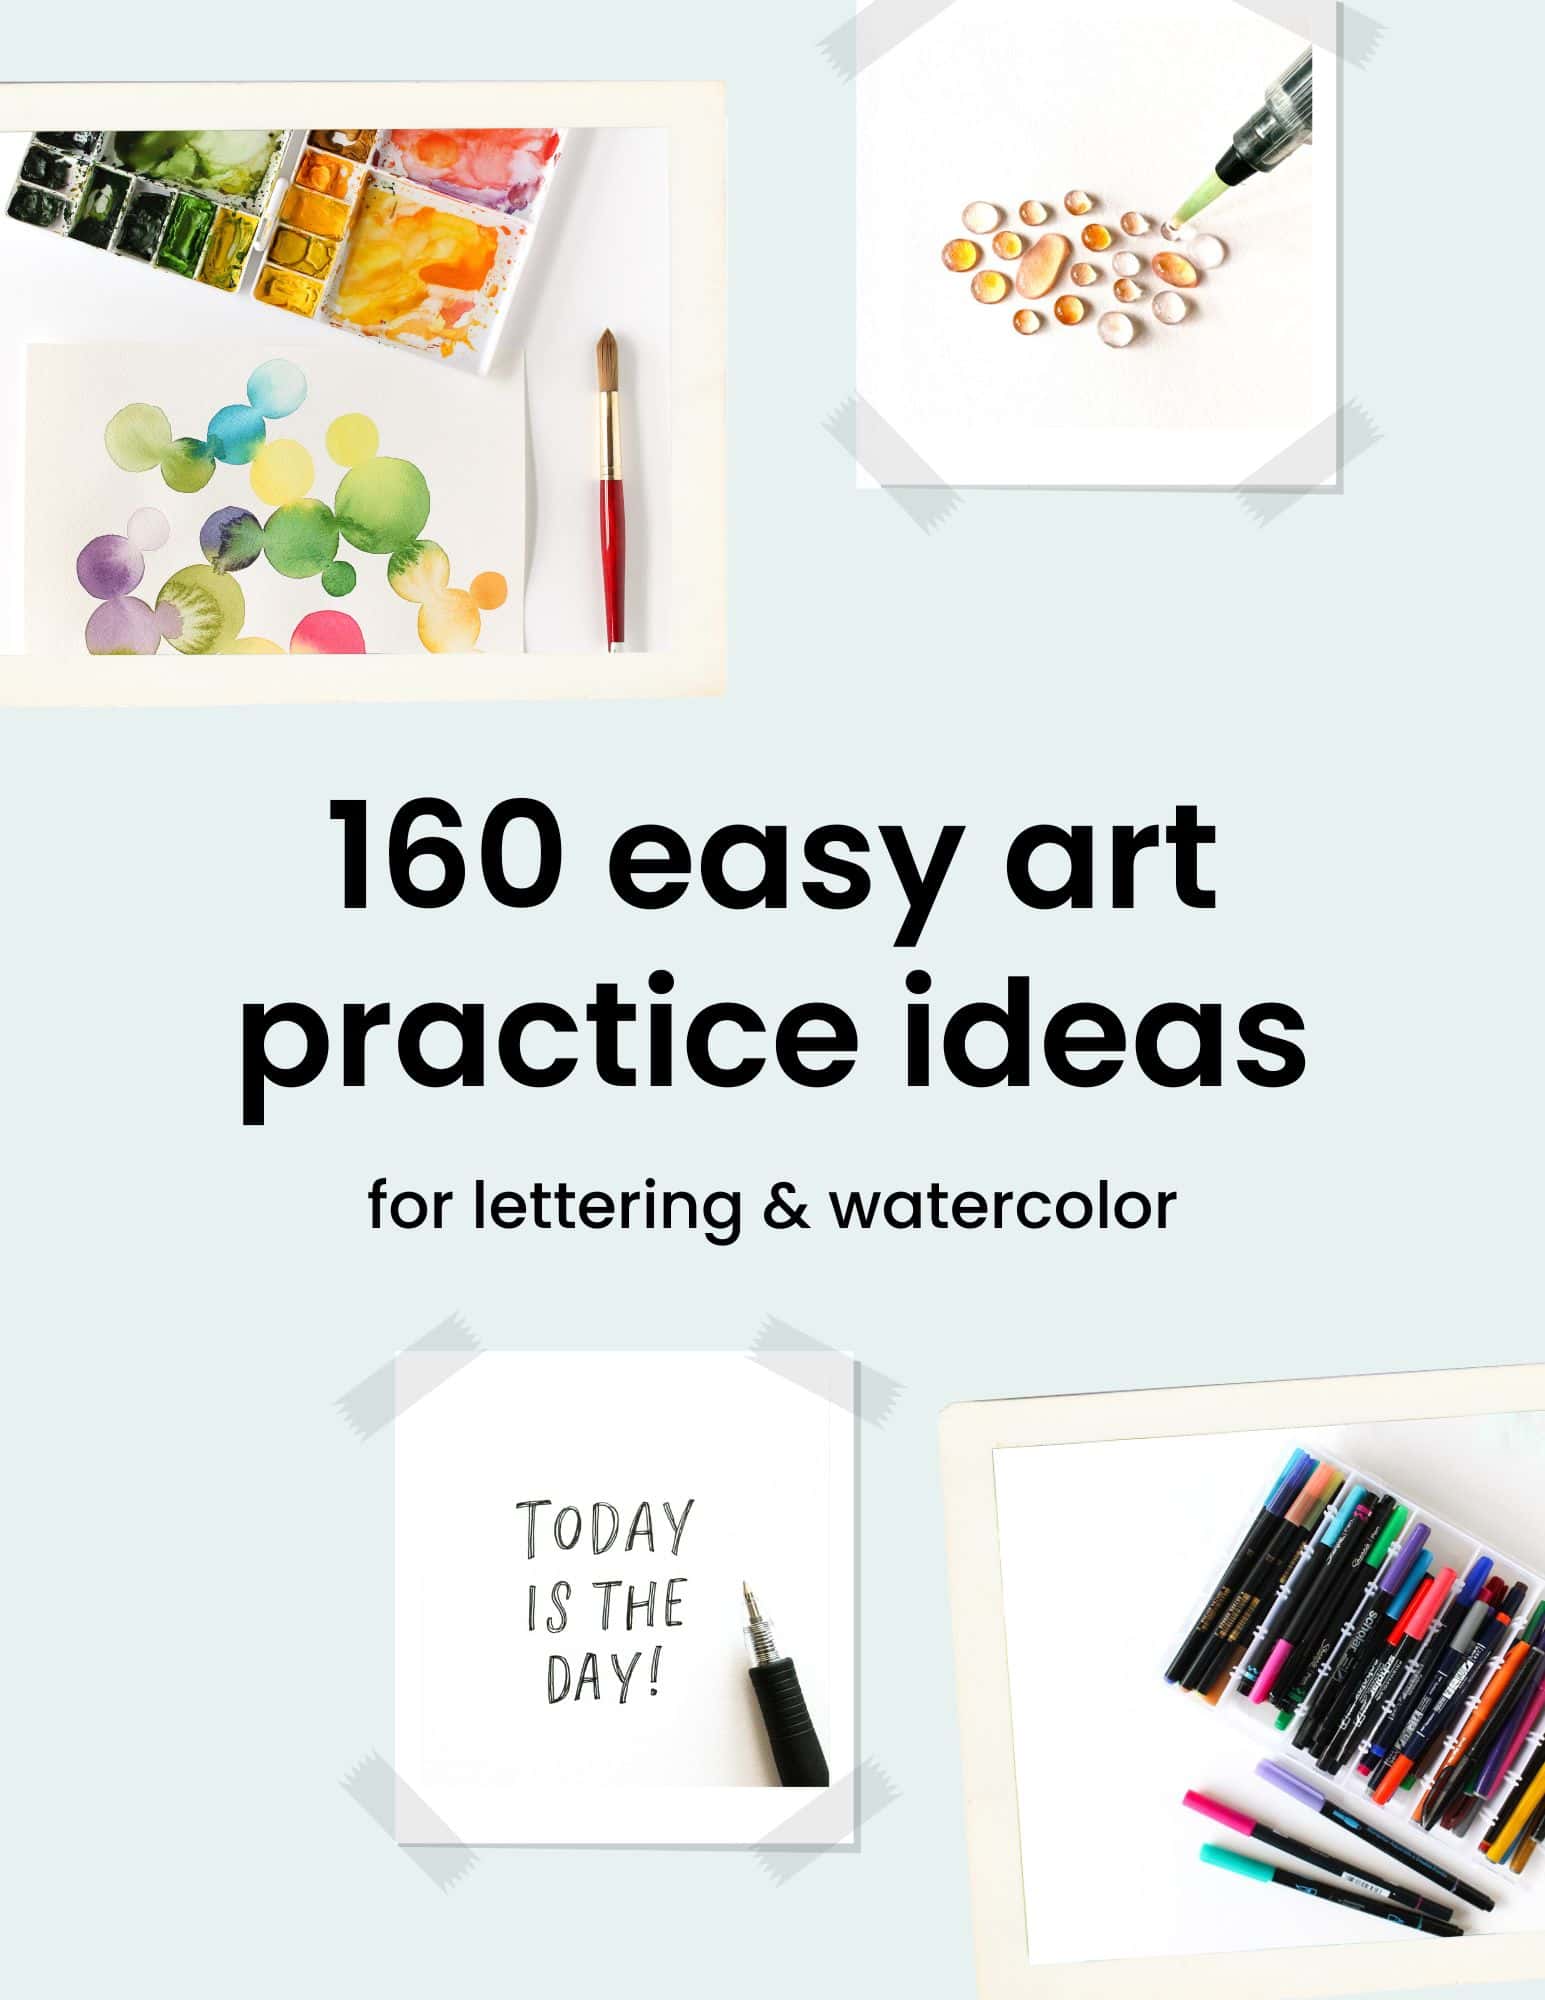 FREE Download: 160 Art Practice Prompts - By Heidi Grace